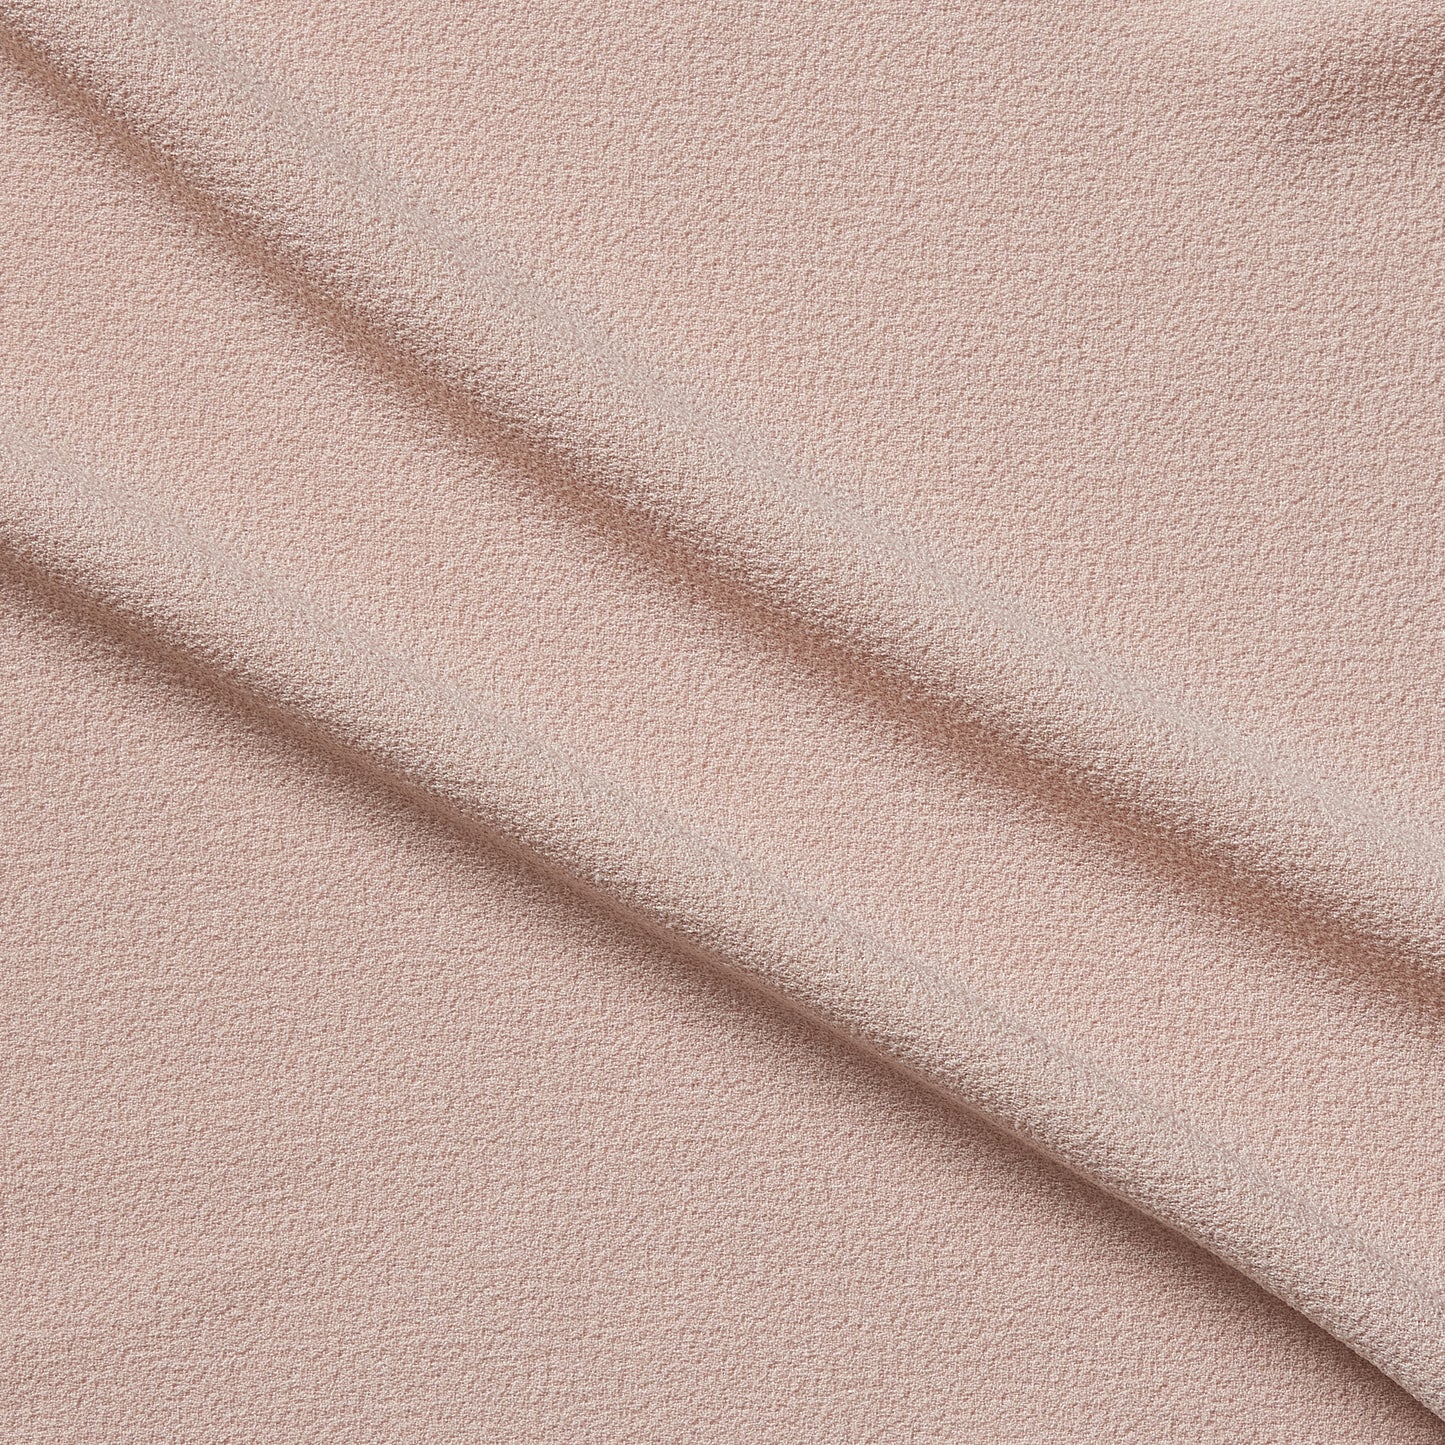 London Crepe presenting the nude color version with 2 way stretch knit polyester with spandex